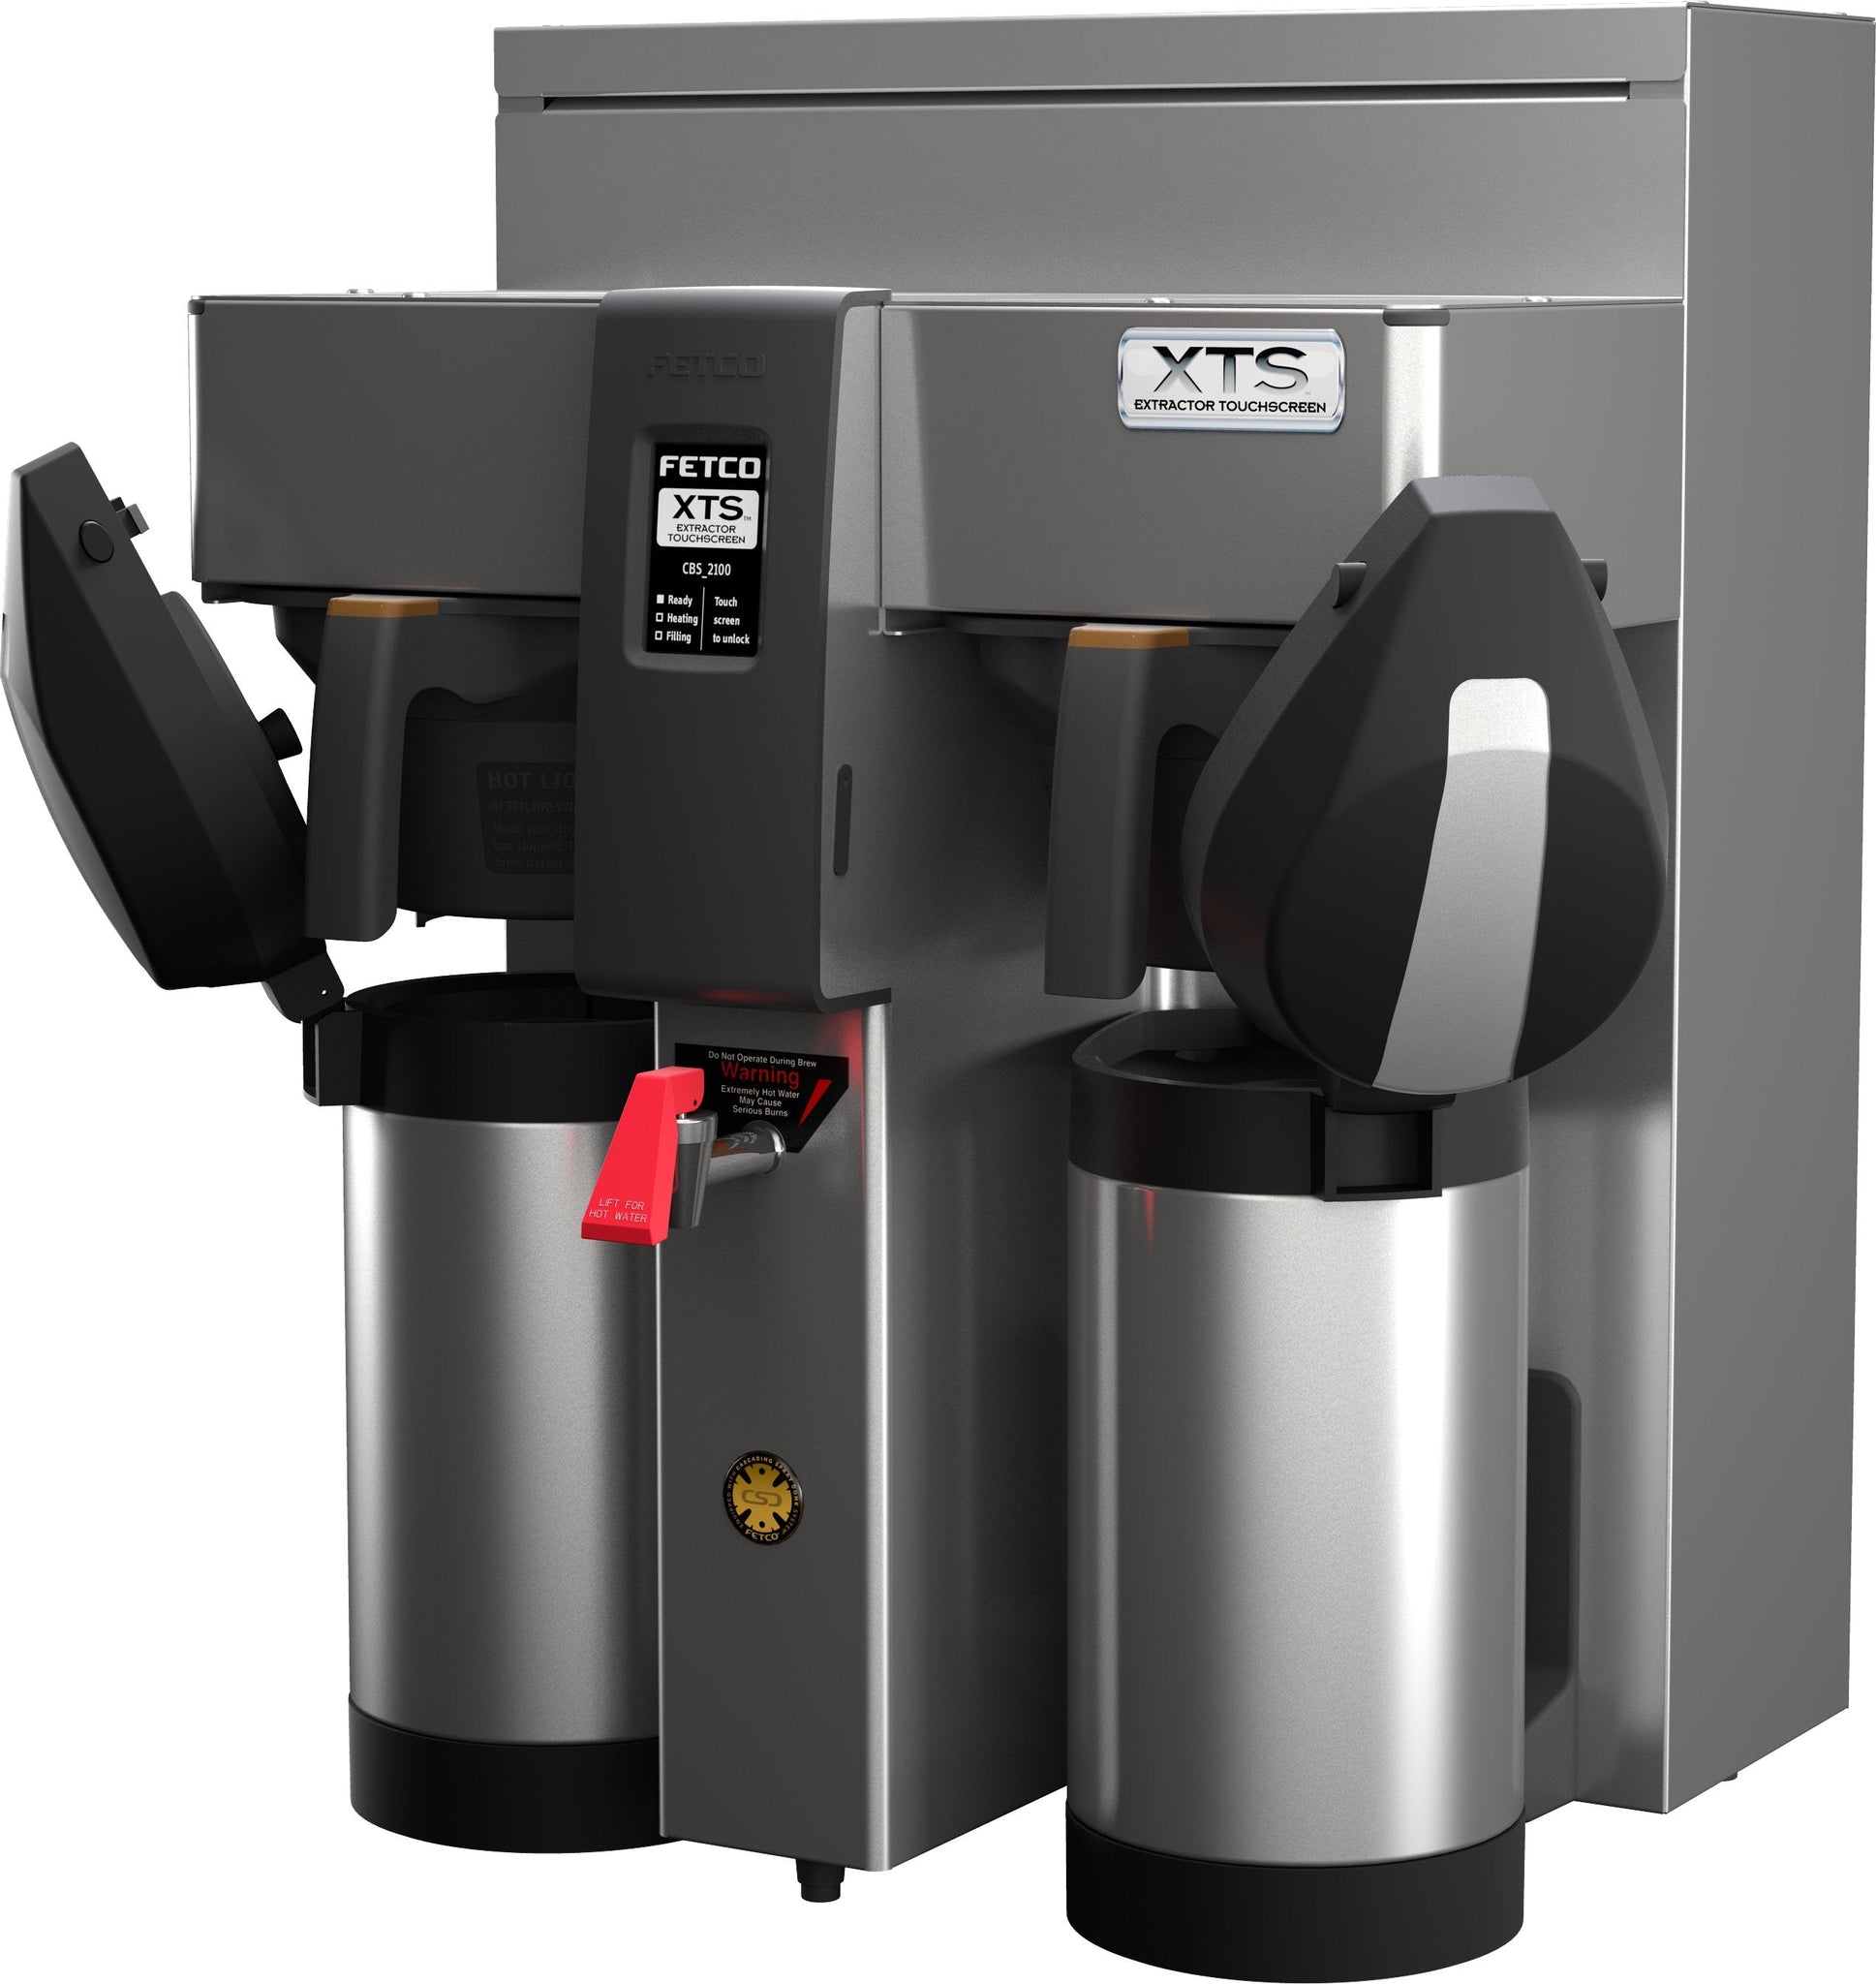 Fetco - Touchscreen Series Airpot Coffee Brewer Double Station 2 x 3 kW - CBS-2132XTS